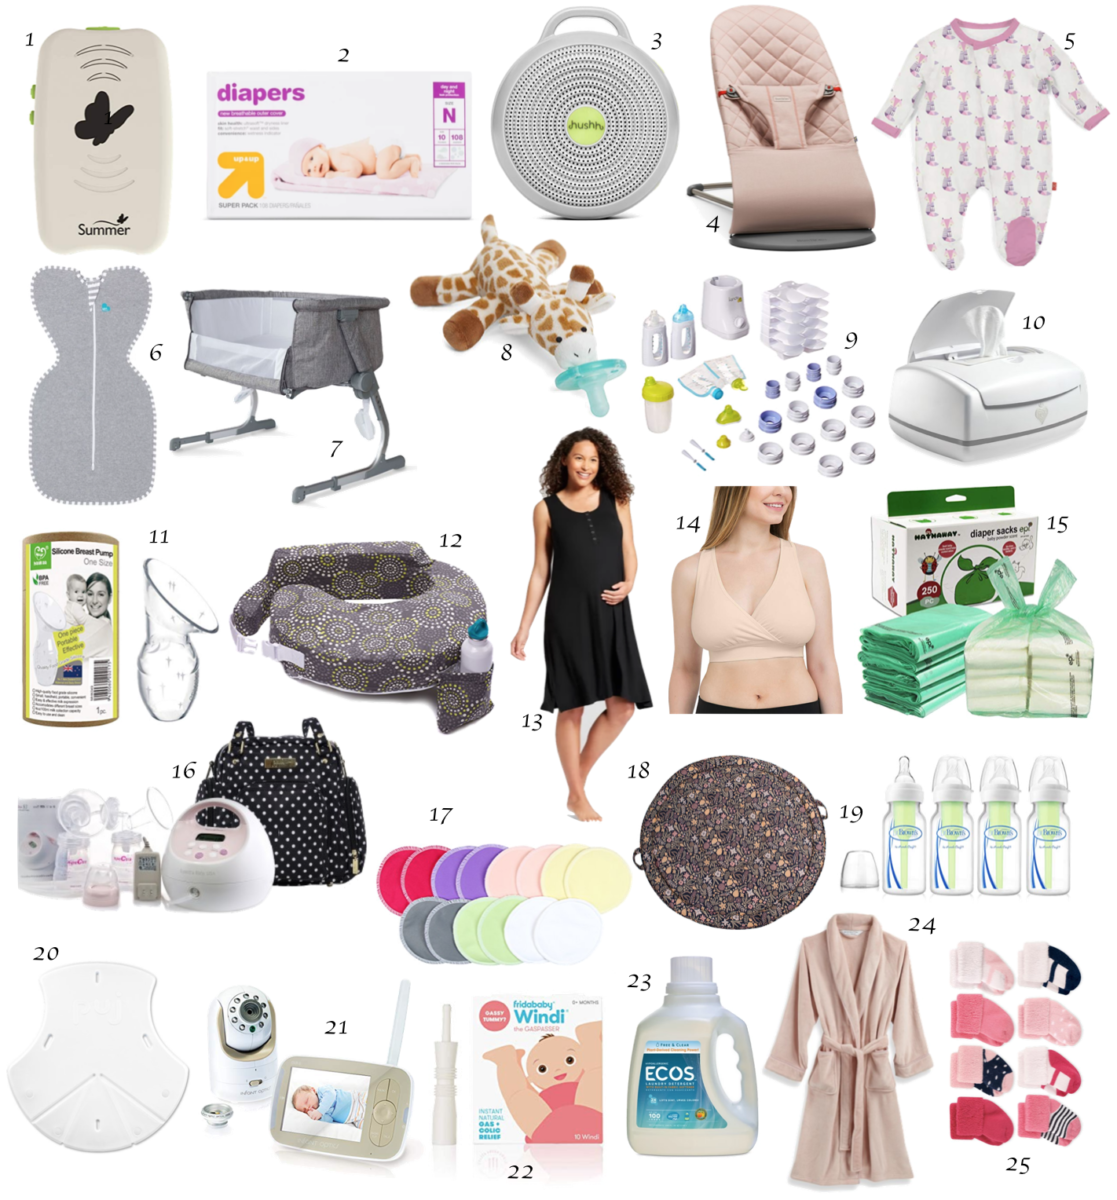 The Top 25 MUST HAVE Newborn Products